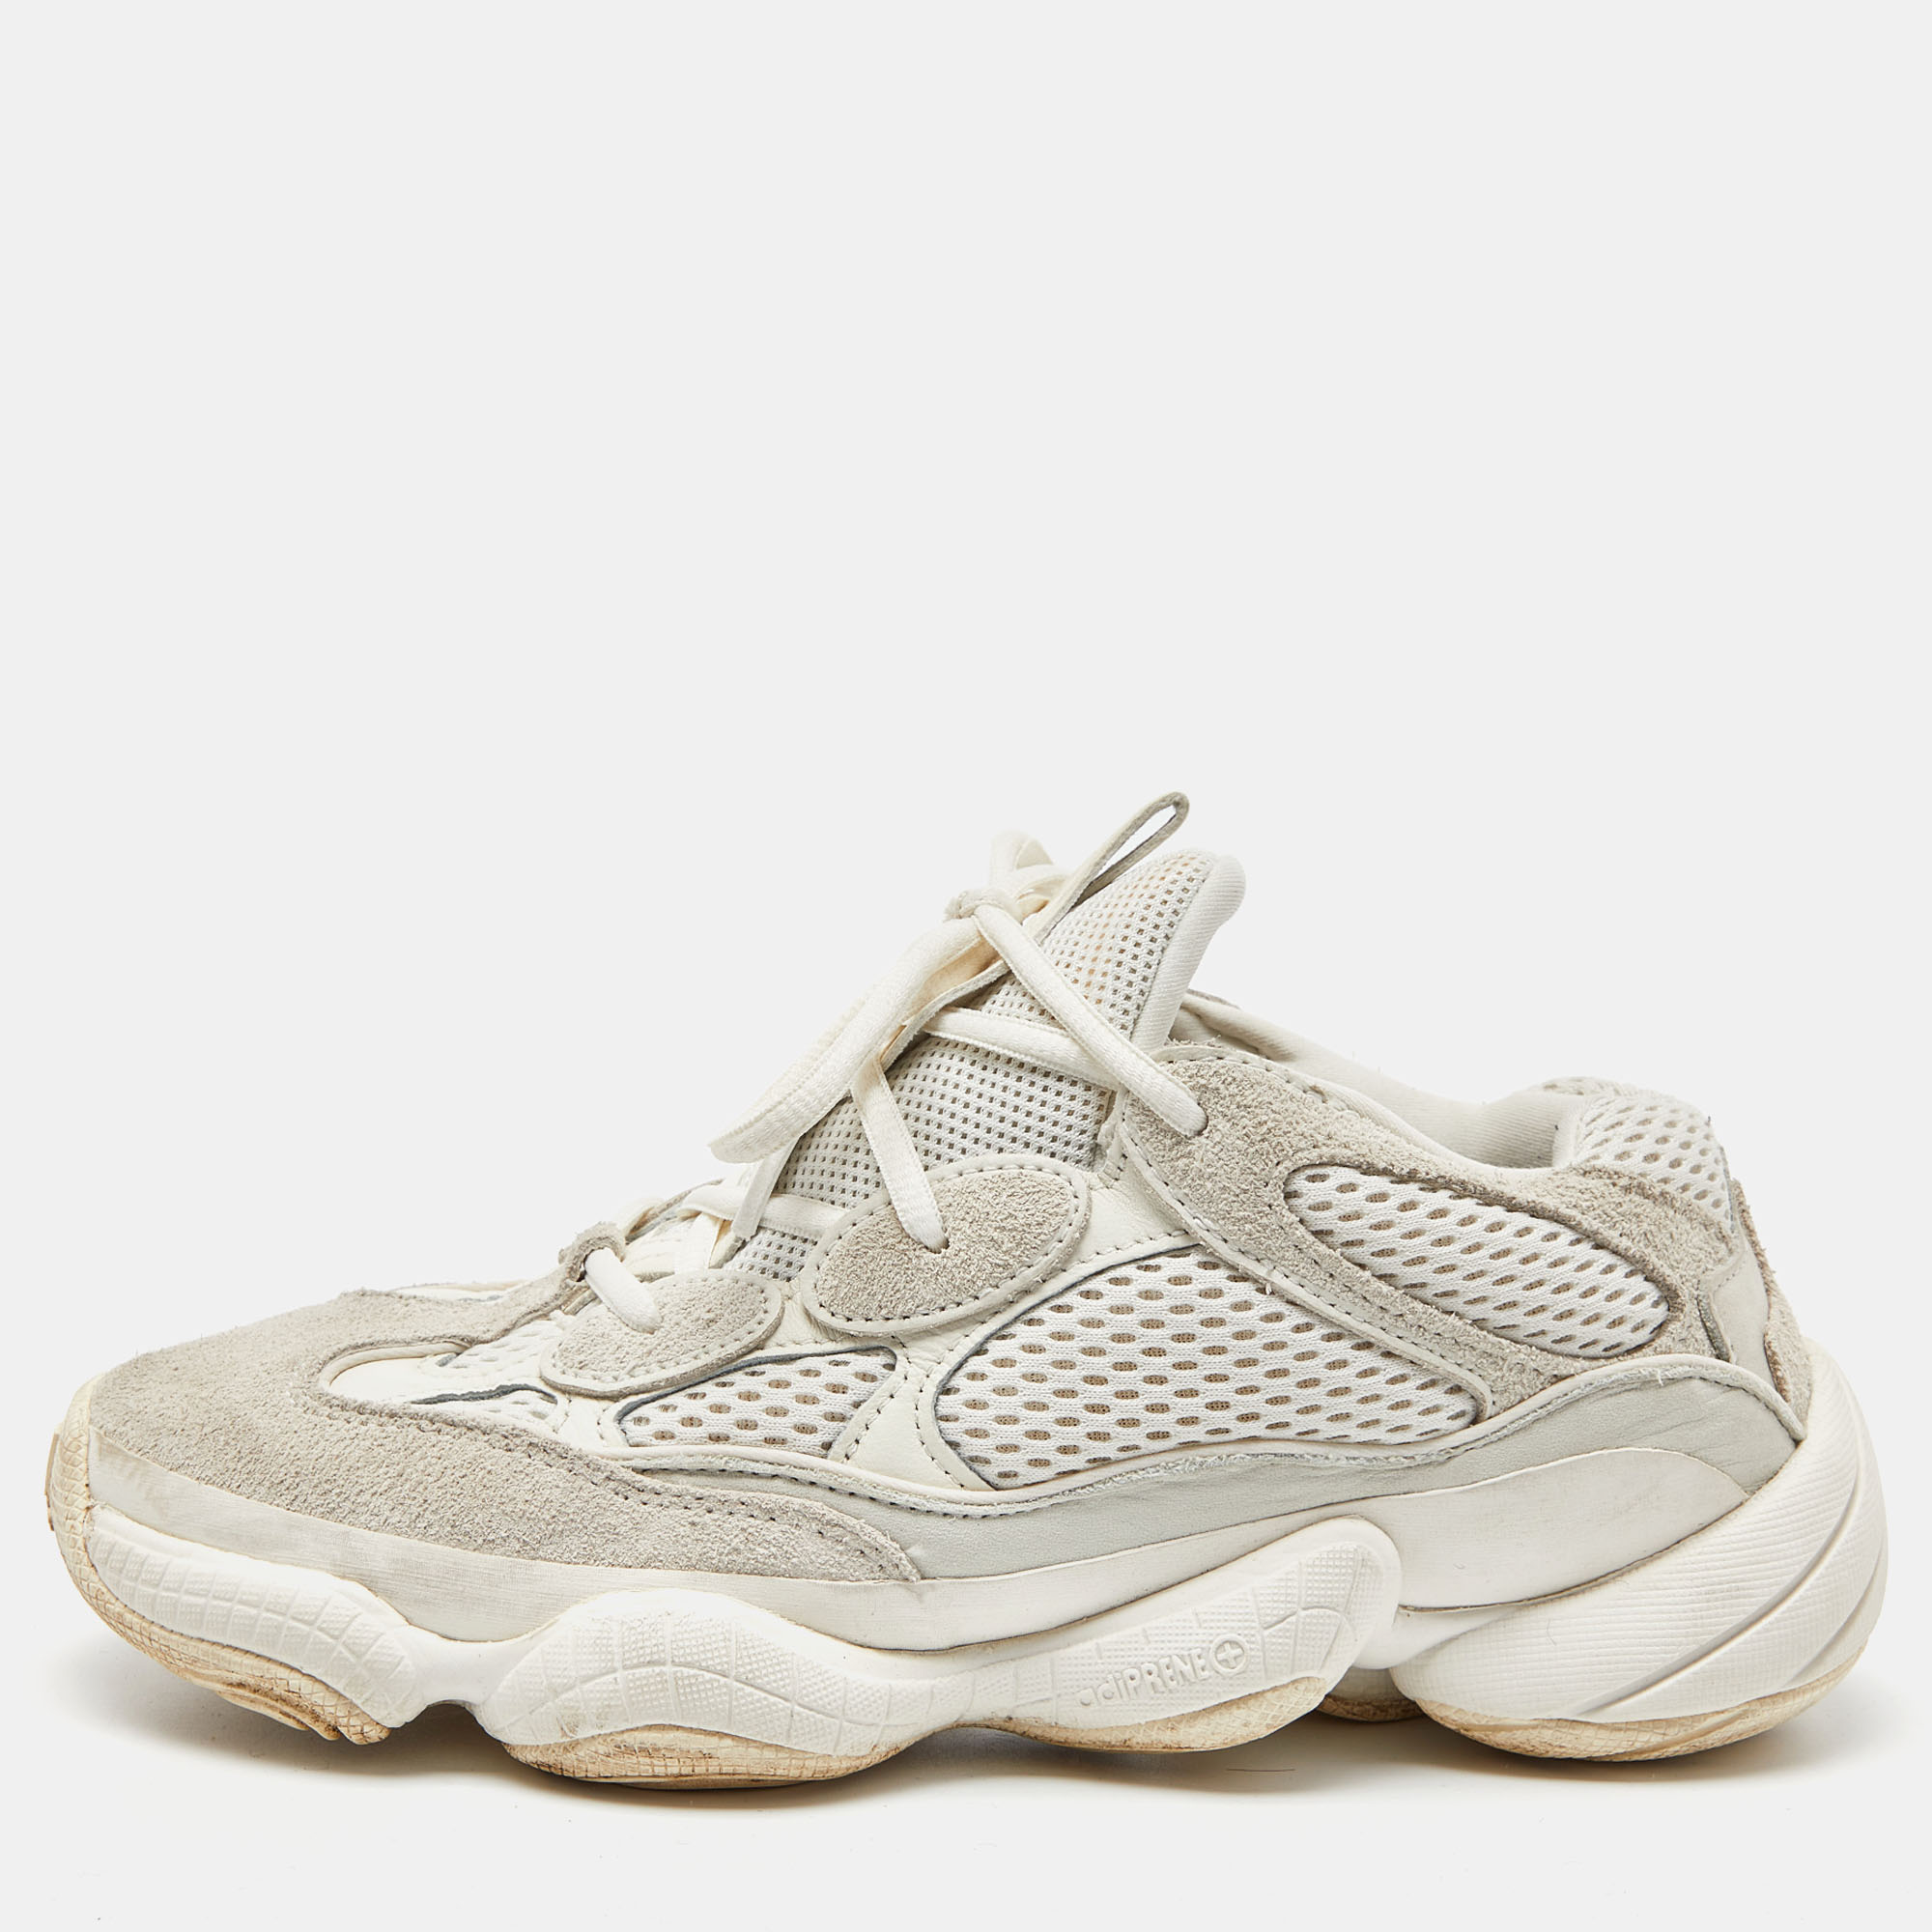 

Yeezy x Adidas White Suede and Mesh Yeezy 500 Bone White Sneakers Size